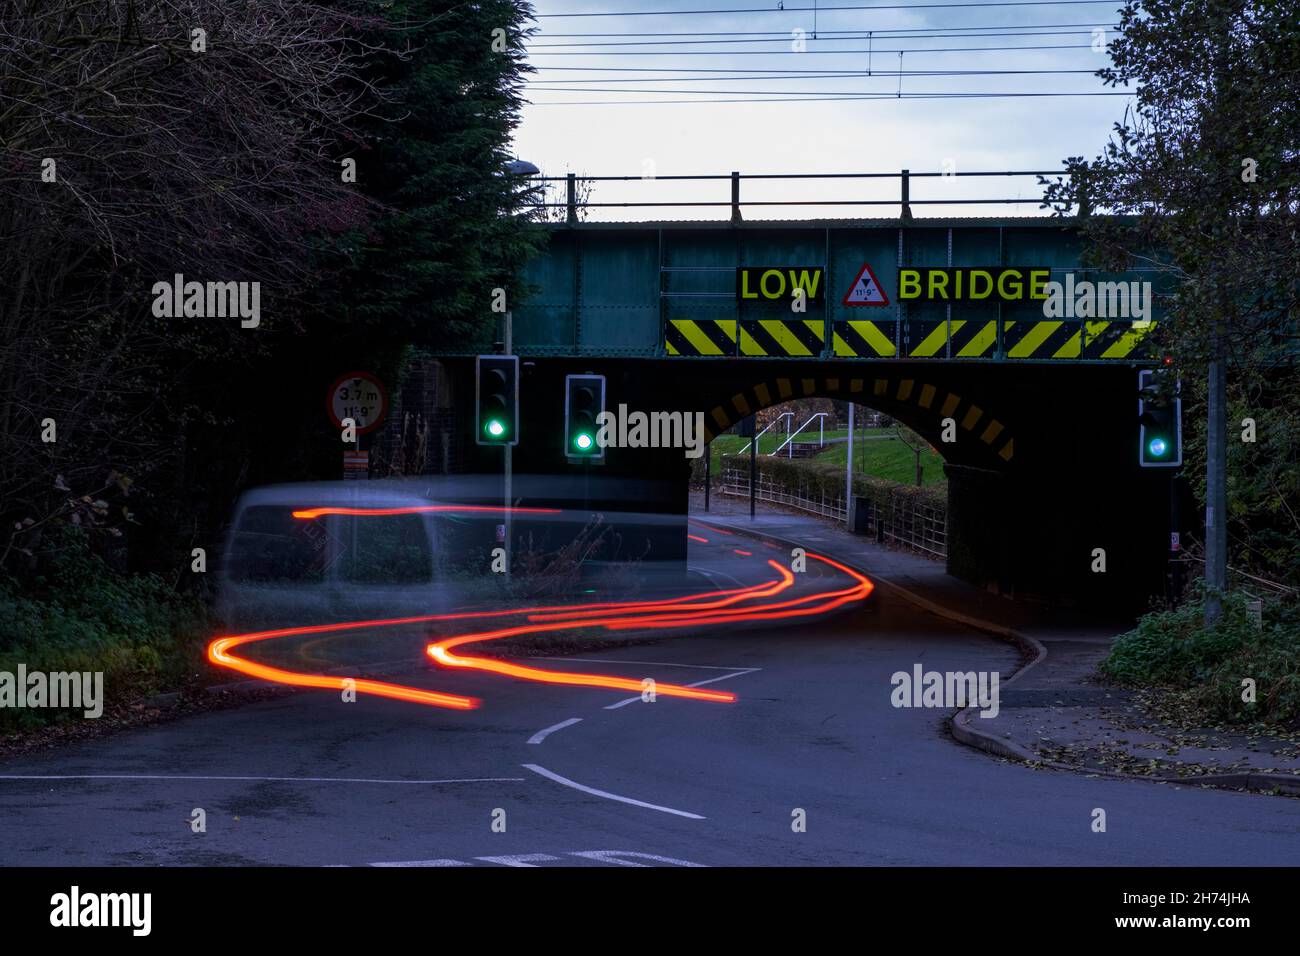 Cars with red light trails under railway bridge with low bridge warning sign at dusk Stock Photo